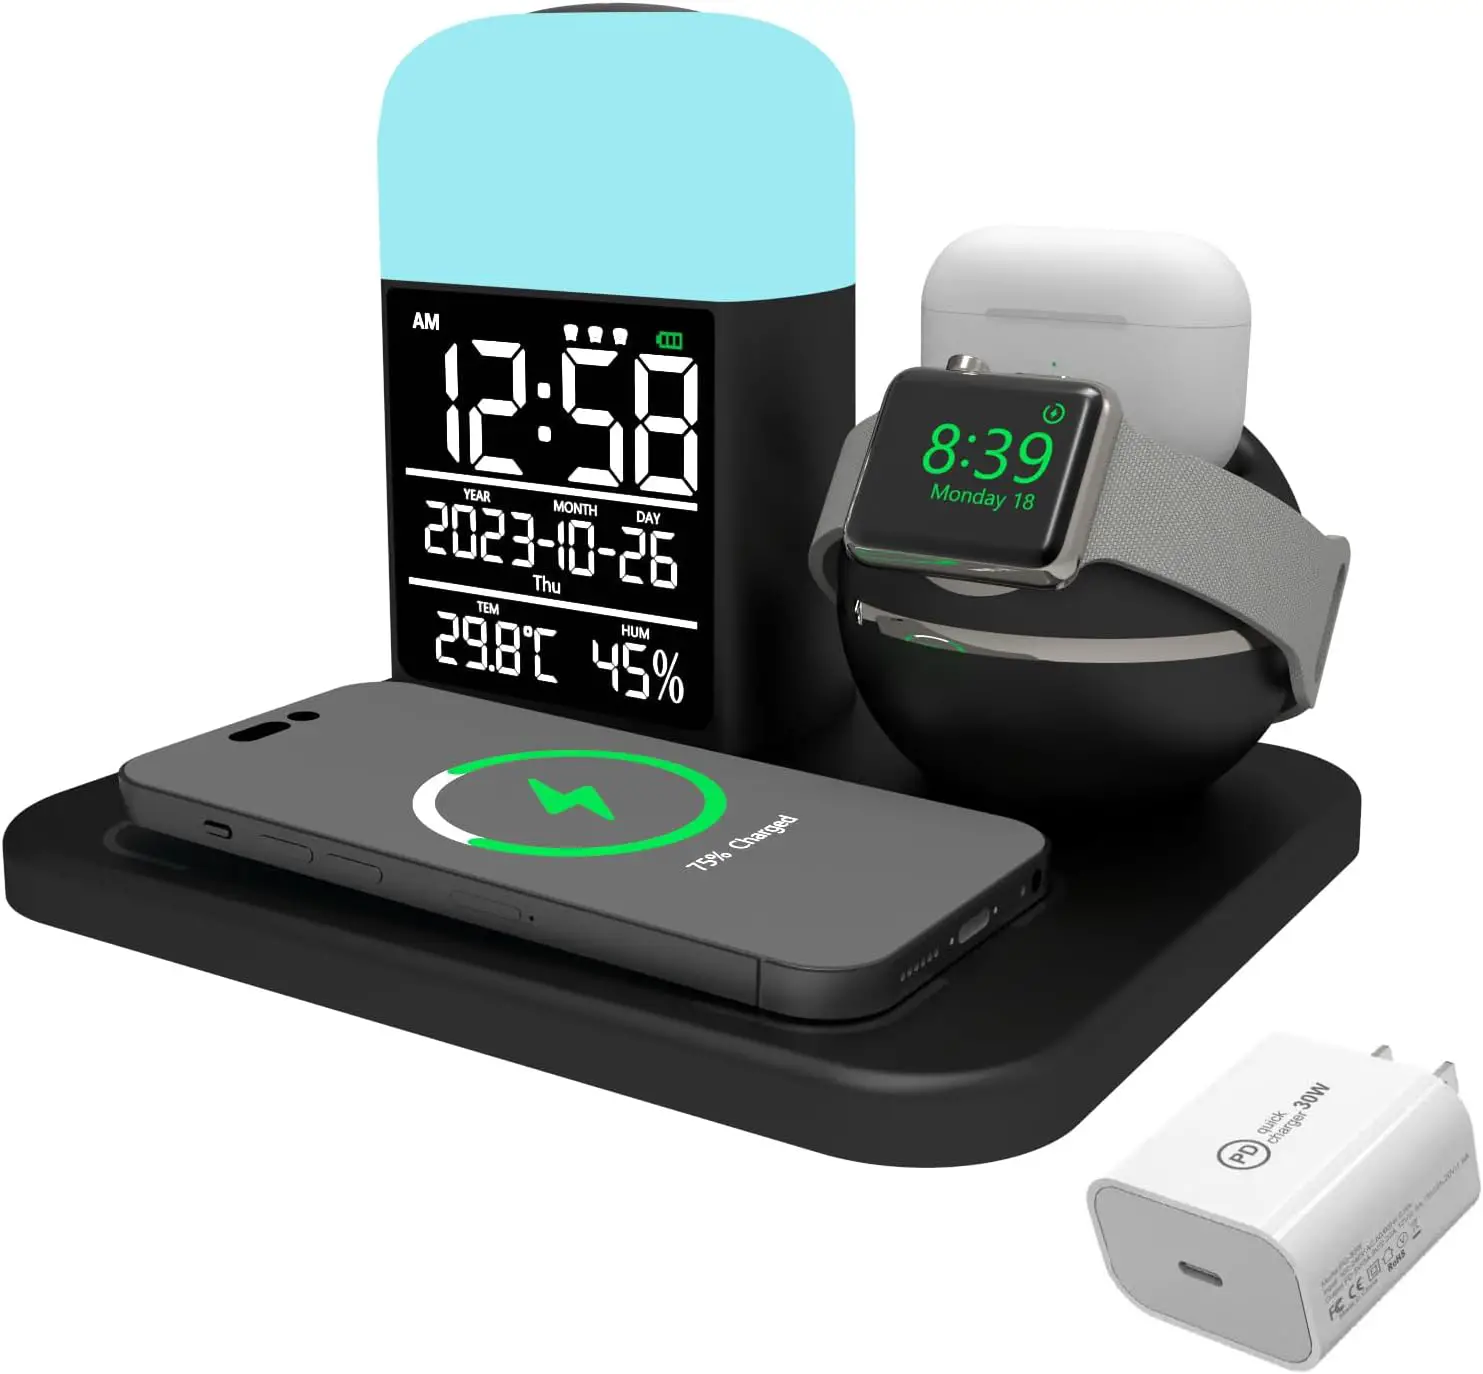 3 in 1 Wireless Charging Station,Wireless Charger Compatible for iPhone 14/13/12/11/Pro/Max/XS/XR/Plus/Apple Watch 8/7/6/5/4/3/AirPods 3/2/Pro.Digital Alarm Clock with Night Light for Office Bedroom